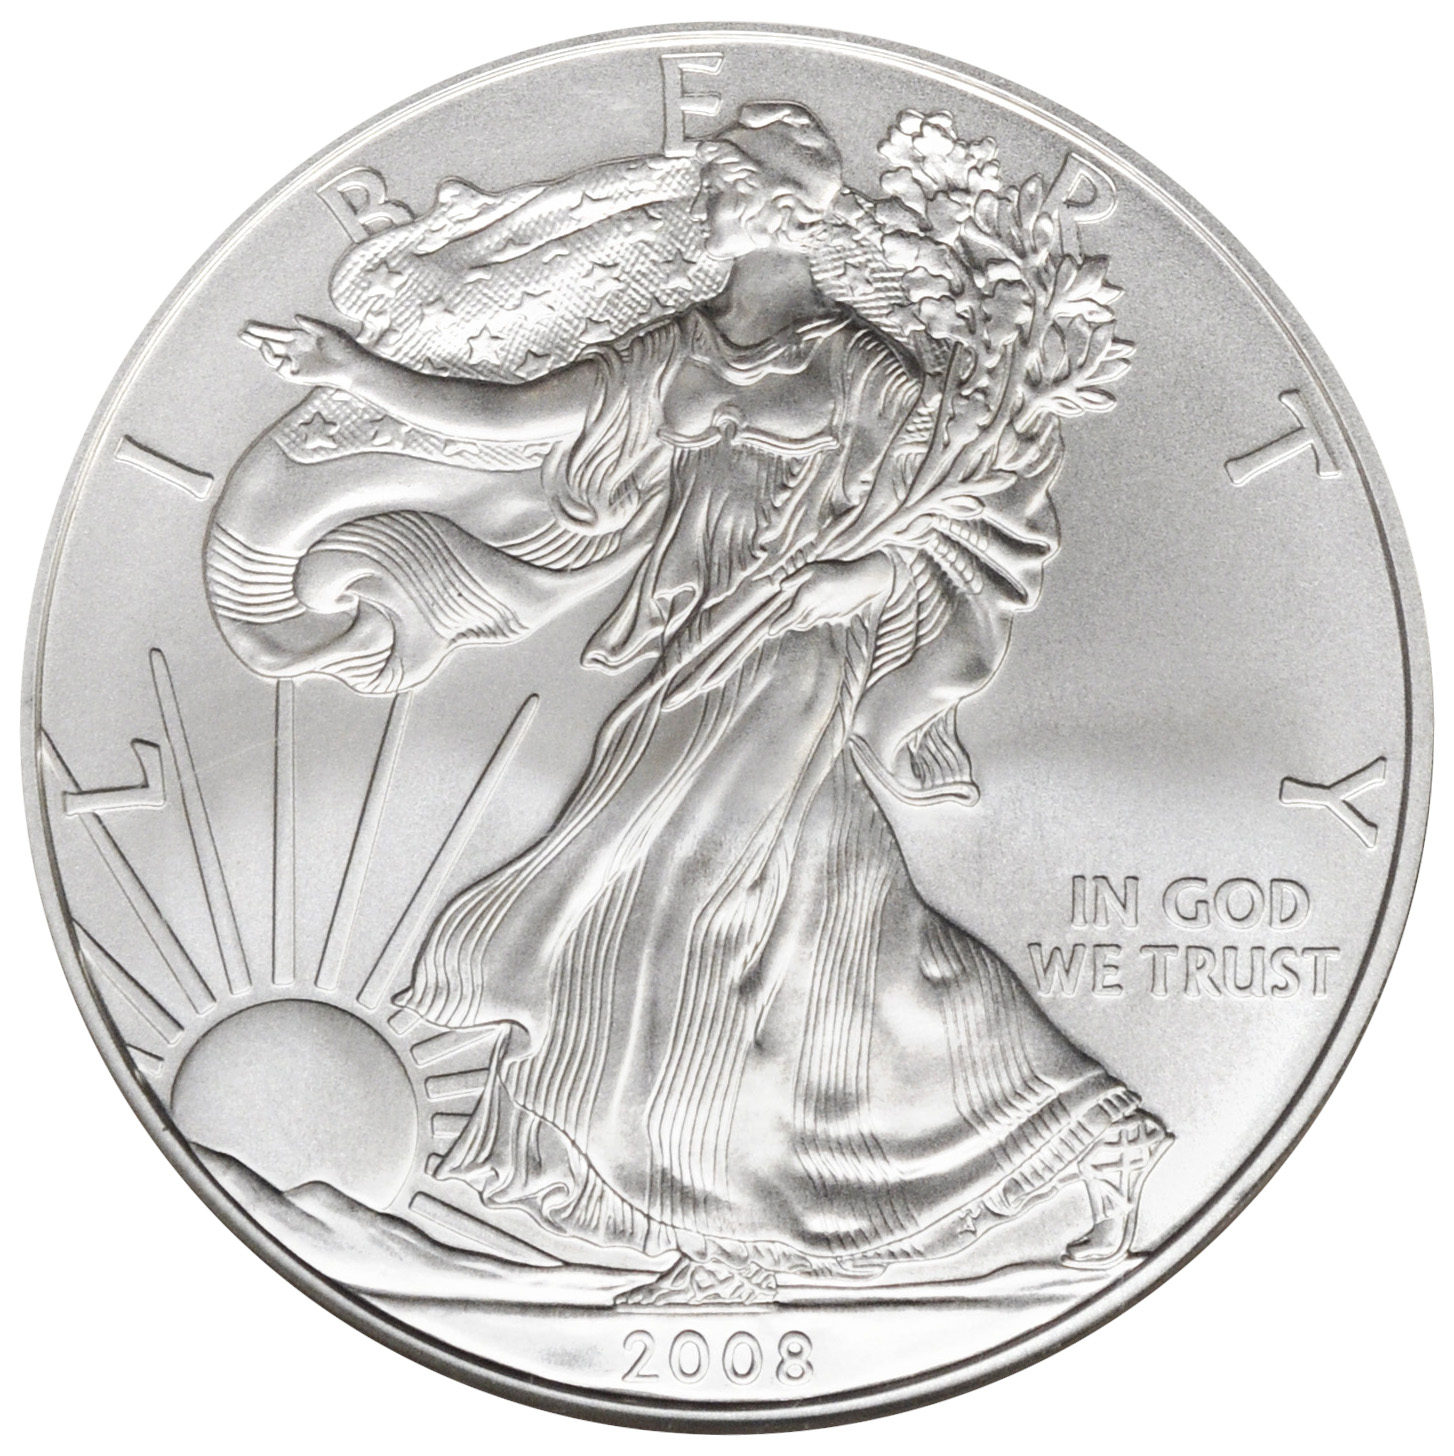 how much is a silver american eagle coin worth